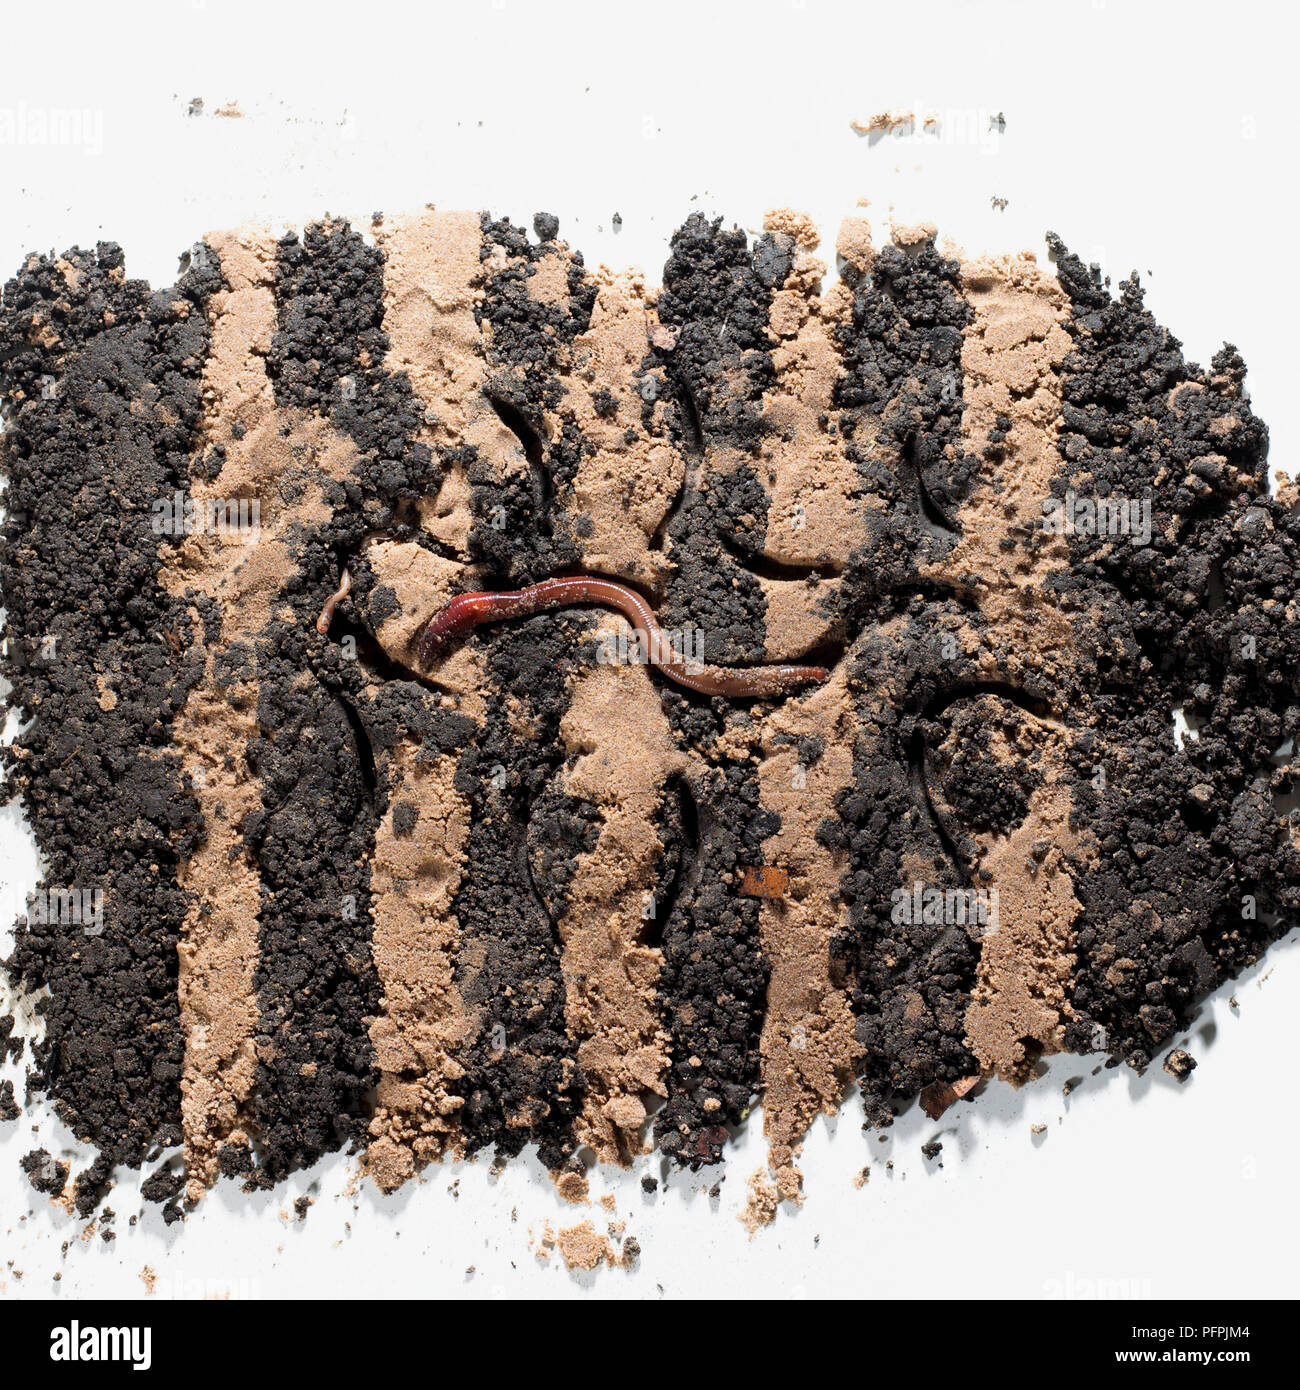 Earthworm wriggling its way through layers of sand and soil, cross-section Stock Photo